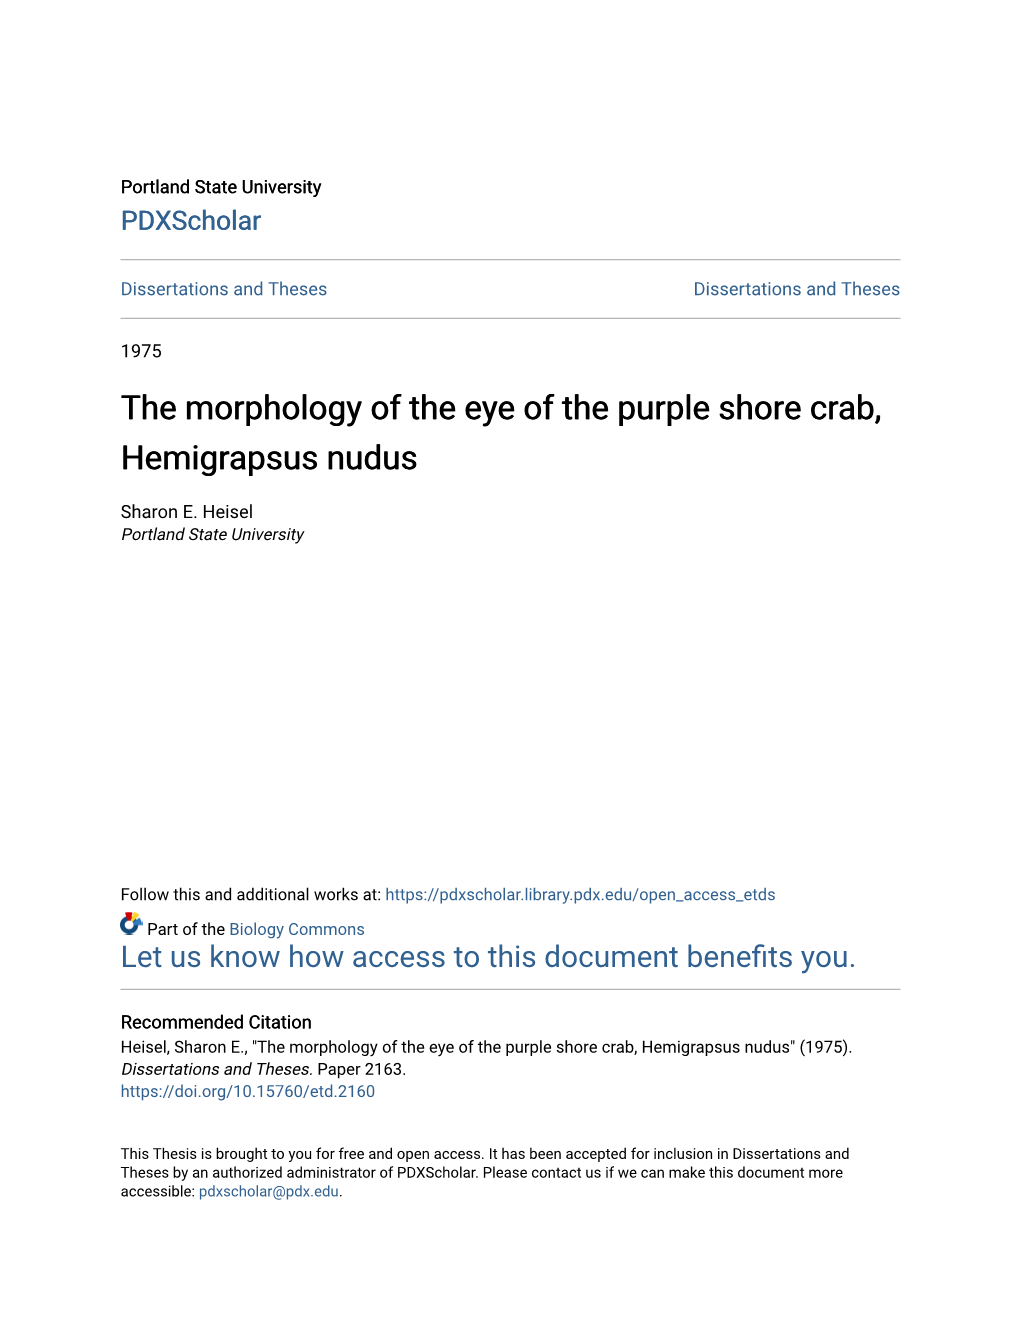 The Morphology of the Eye of the Purple Shore Crab, Hemigrapsus Nudus